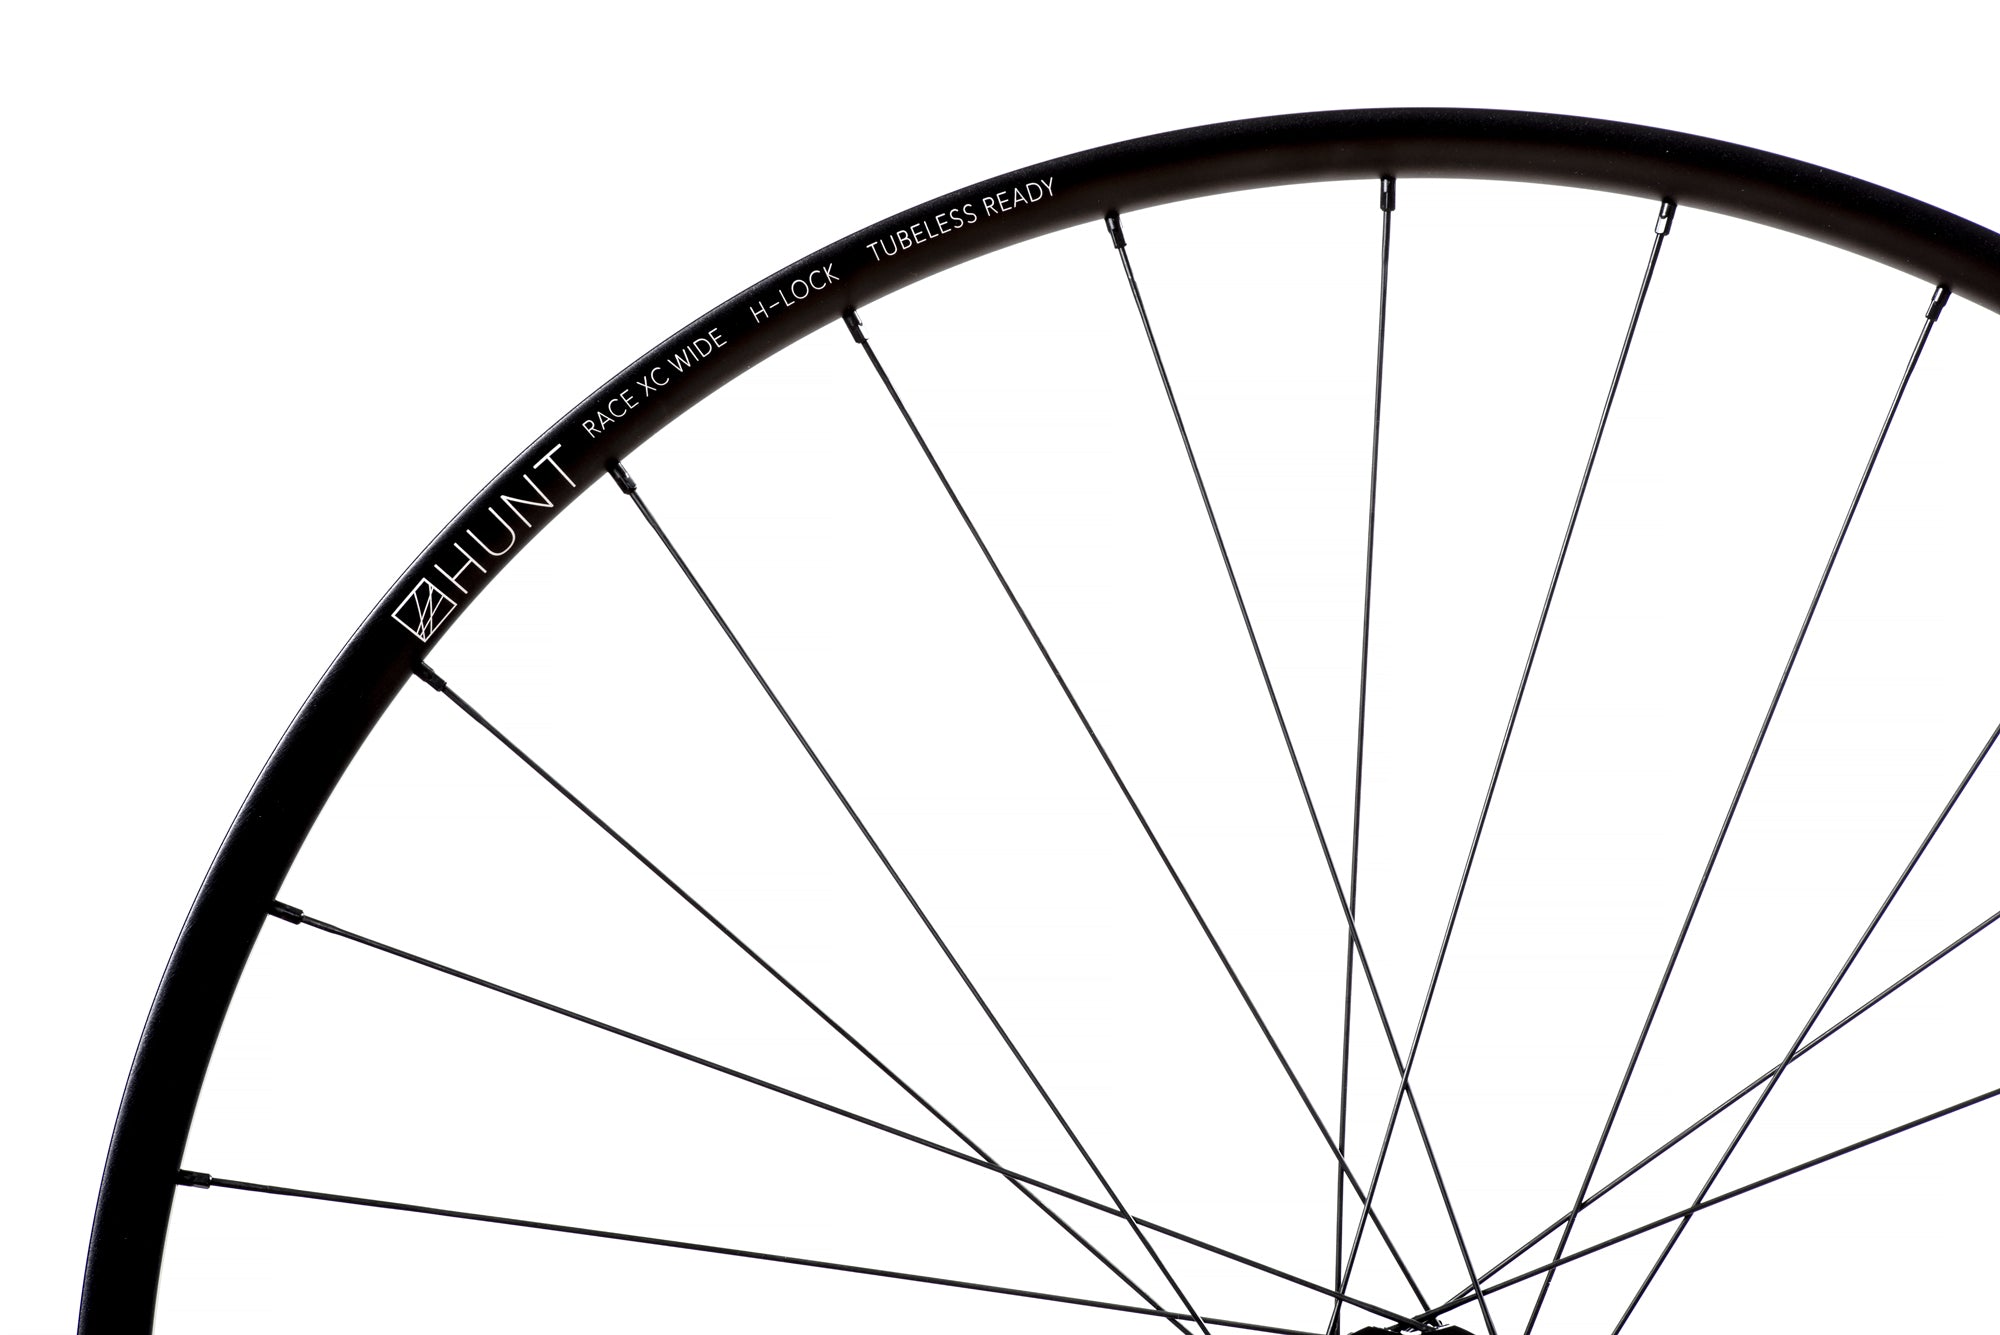 <h1>Spokes</h1><i>We have chosen top of the line, straight pull Pillar Spokes for excellent torsional strength and power transfer. Not only are these spokes extremely lightweight, they are also able to provide a greater degree of elasticity when put under increased stress. The Pillar Spoke Reinforcement (PSR) puts more material at the spoke head to prevent failure in this stress area.</i>